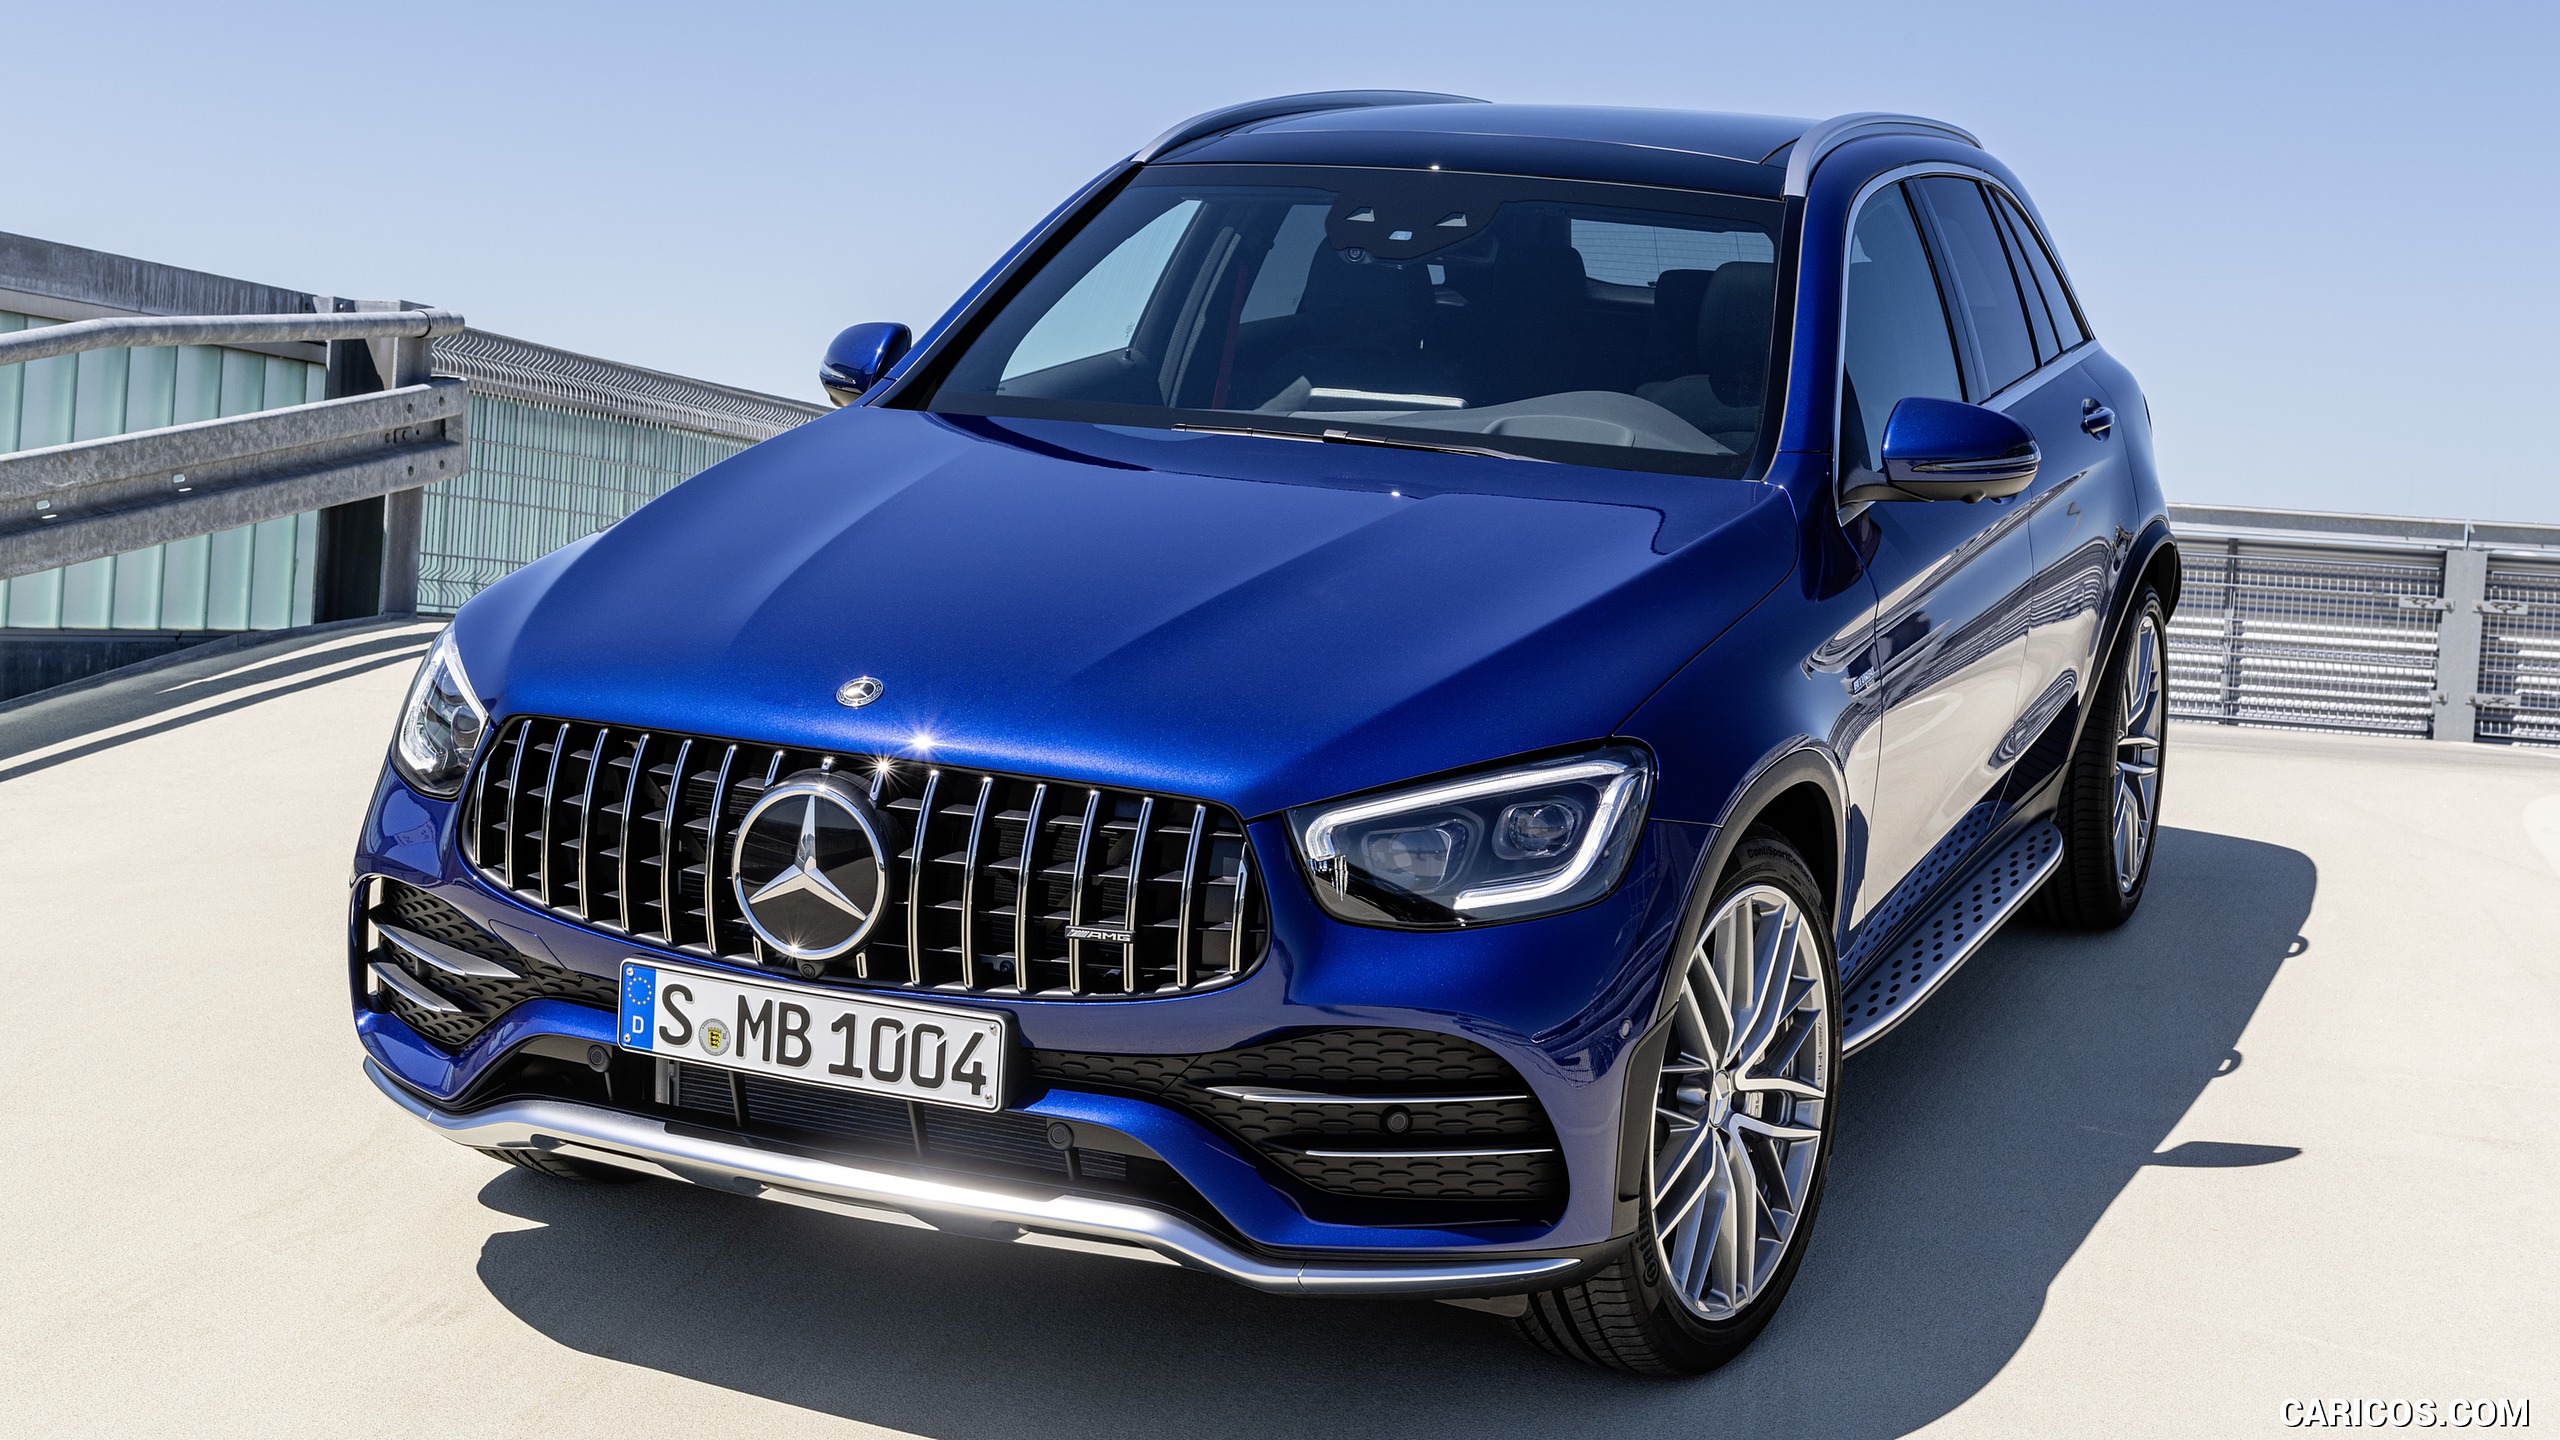 2020 Mercedes-AMG GLC 43 4MATIC - Front, #11 of 86